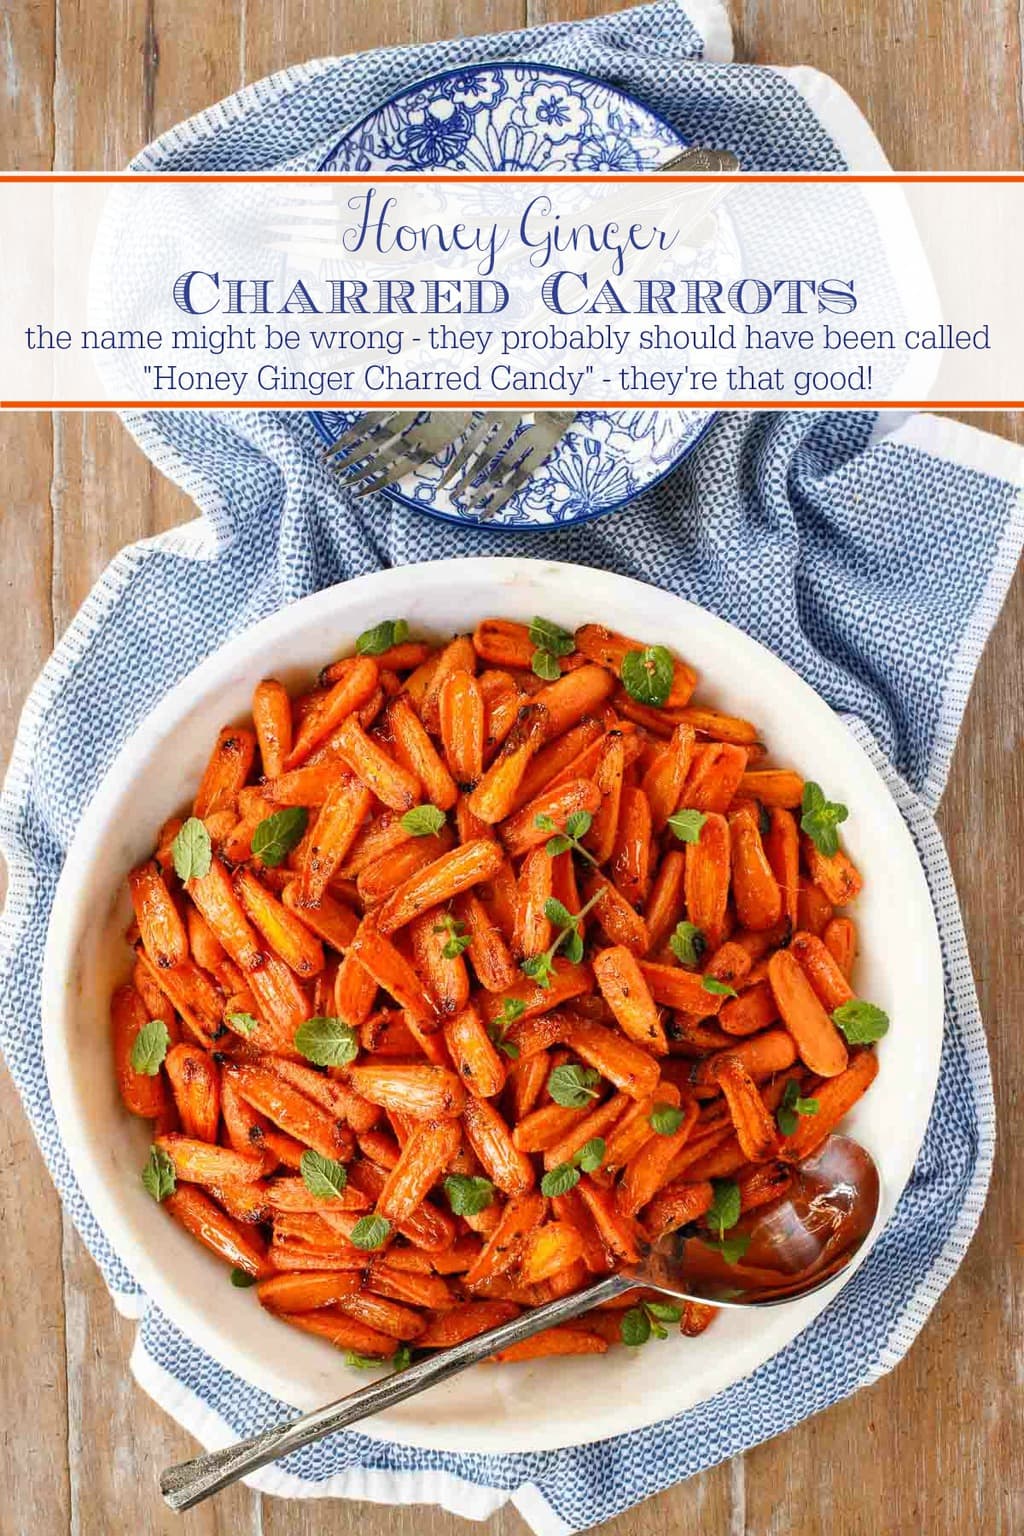 Honey Ginger Charred Carrots - The Thanksgiving side that will steal the show!